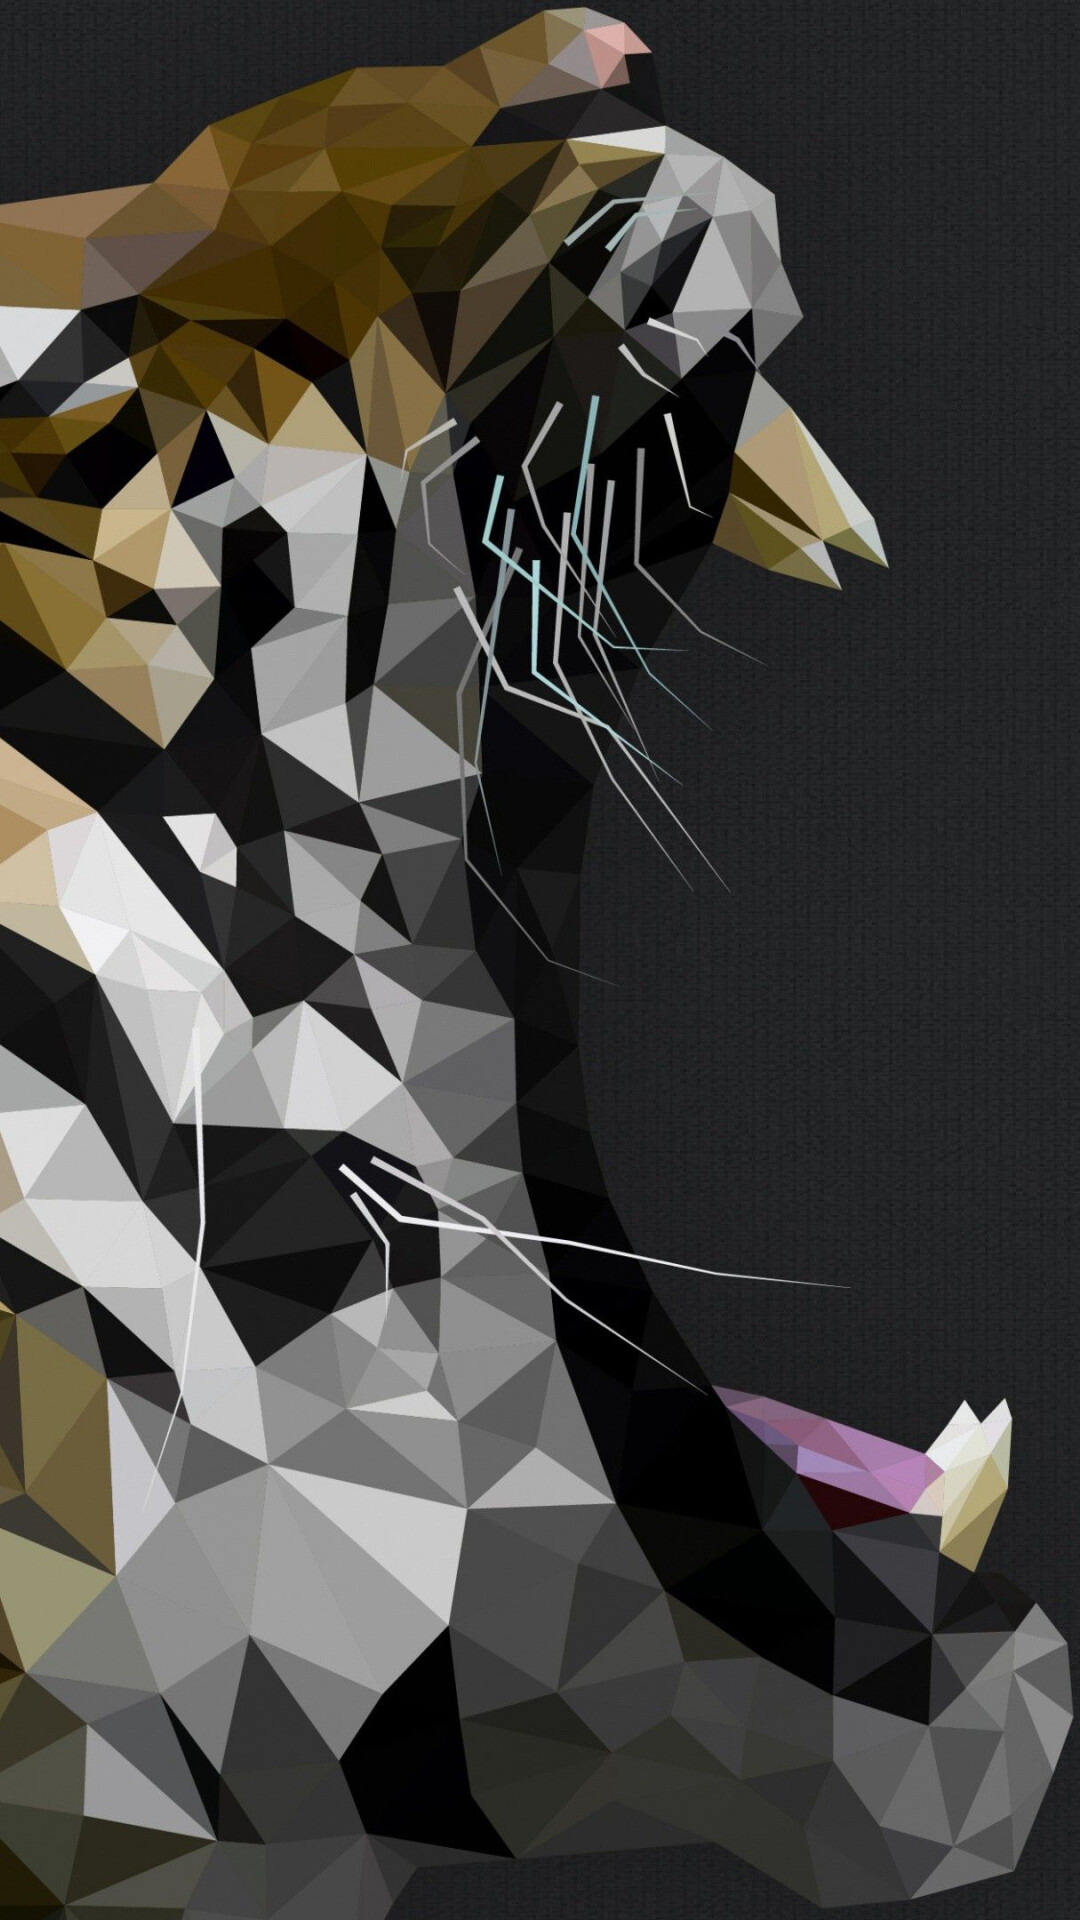 Geometric Animal: An artistic movement created in the early 20th century by artists with a fascination for regular shapes, Tiger. 1080x1920 Full HD Wallpaper.